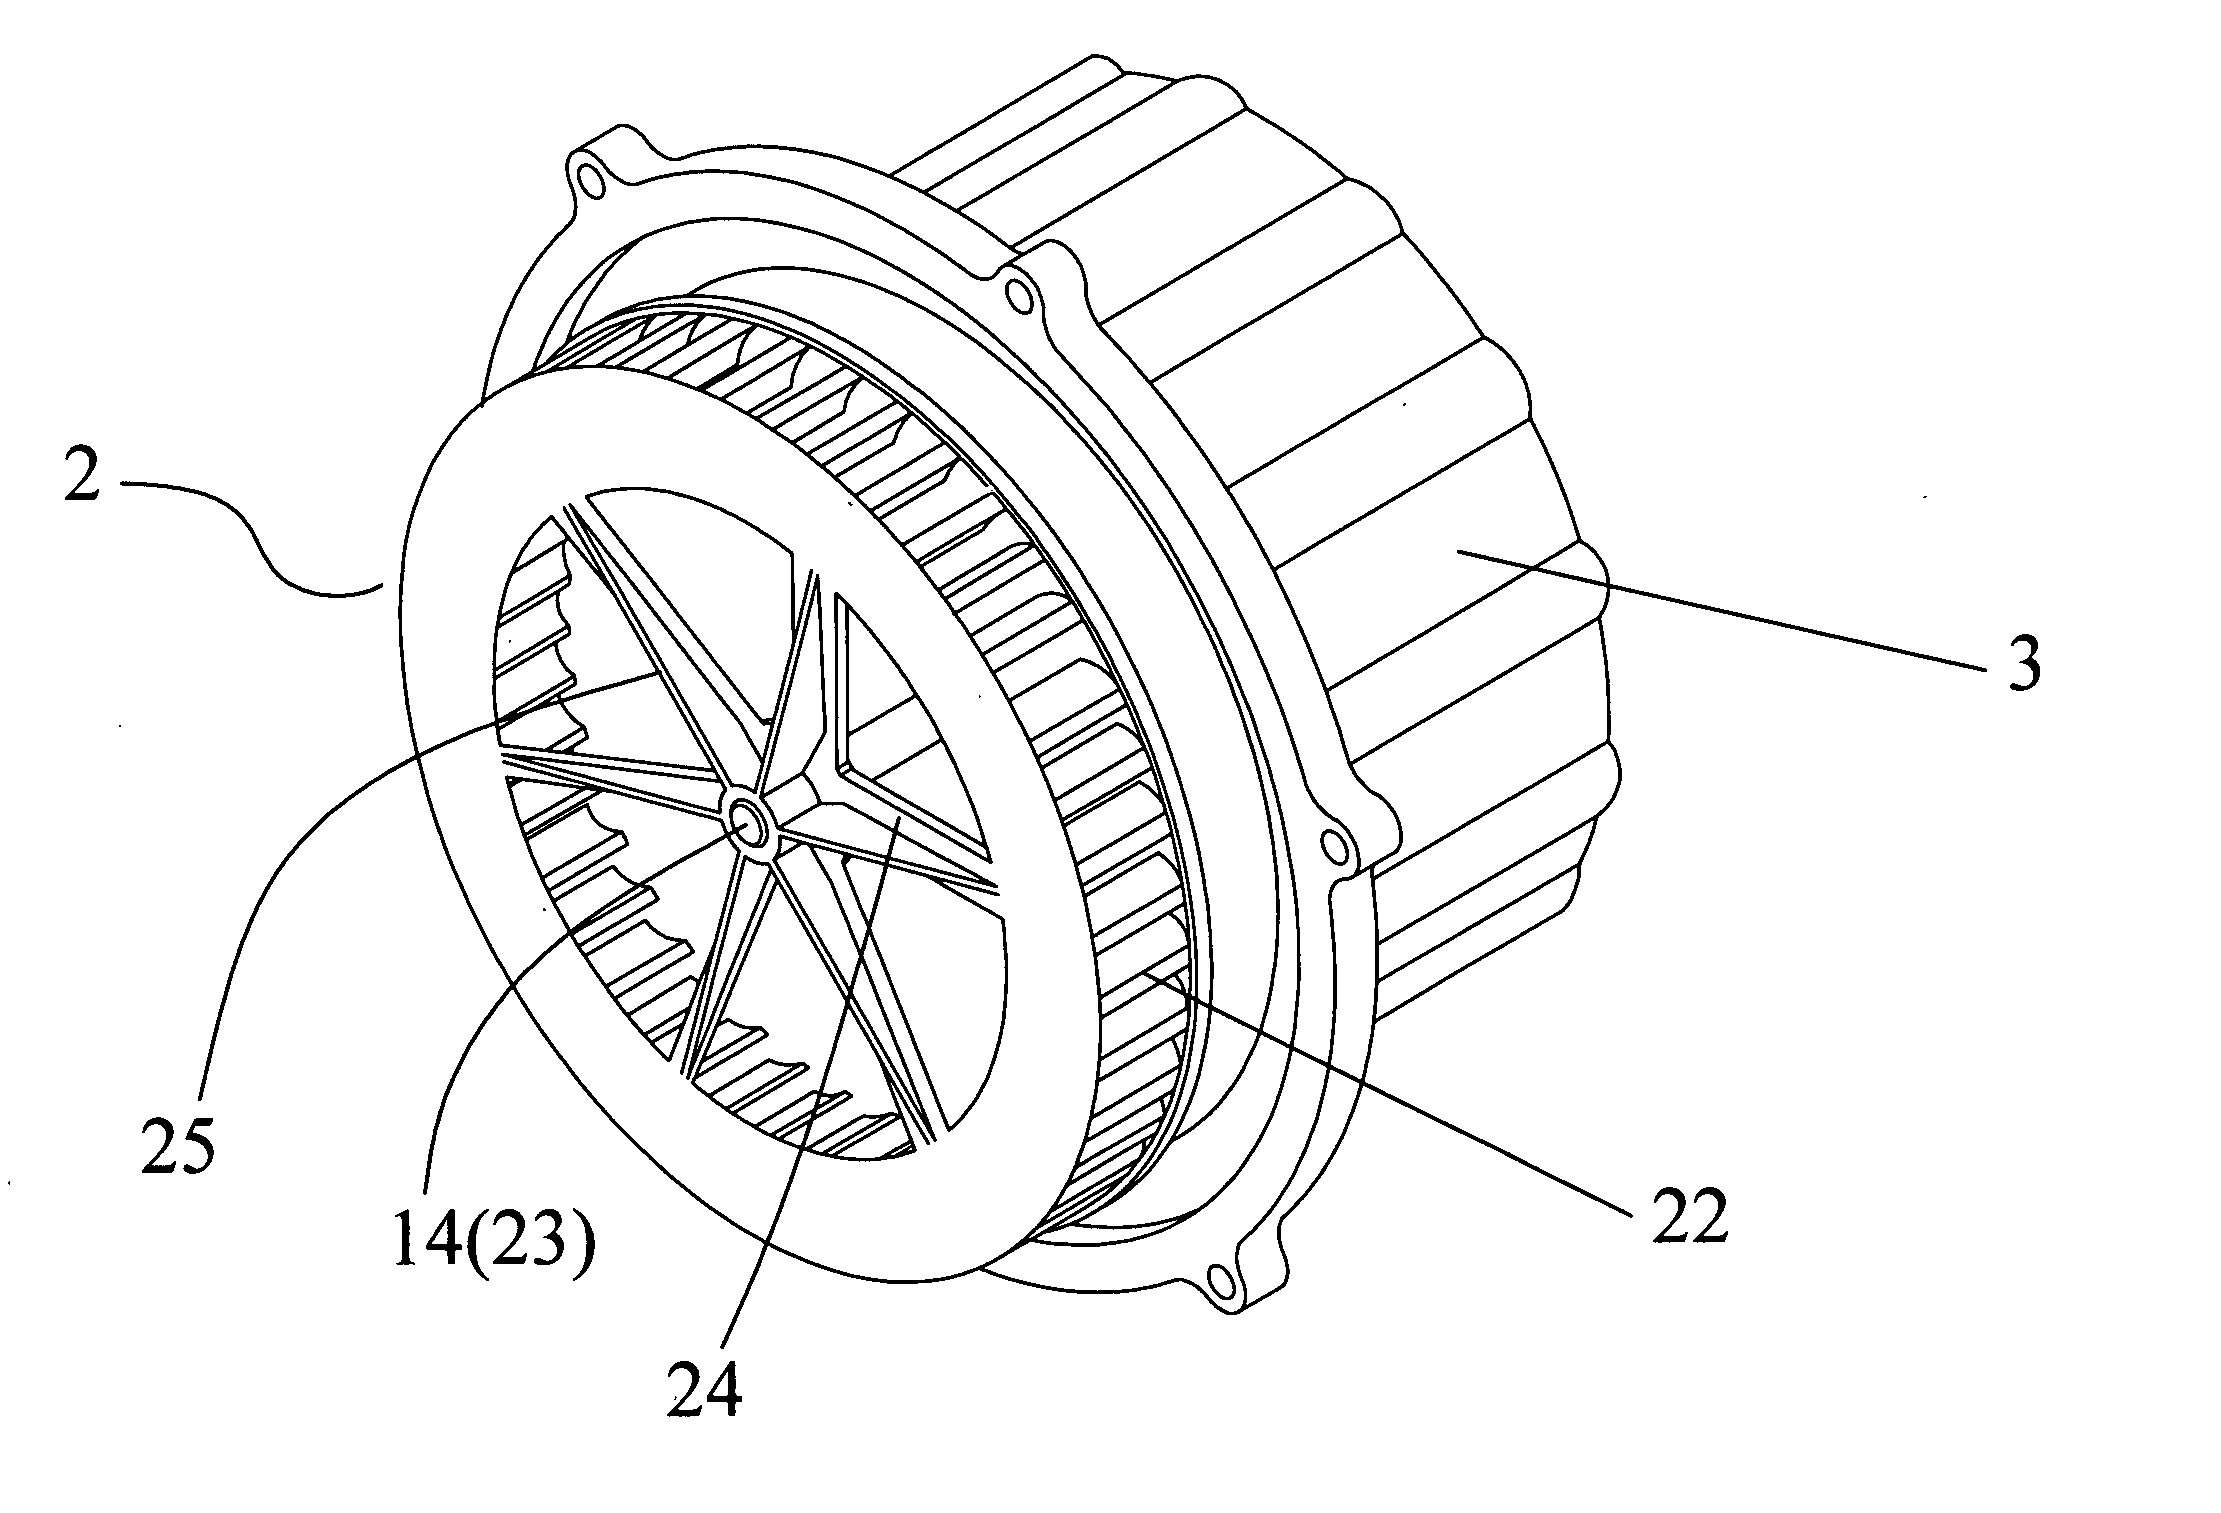 Motor-operated fan for air cushion table